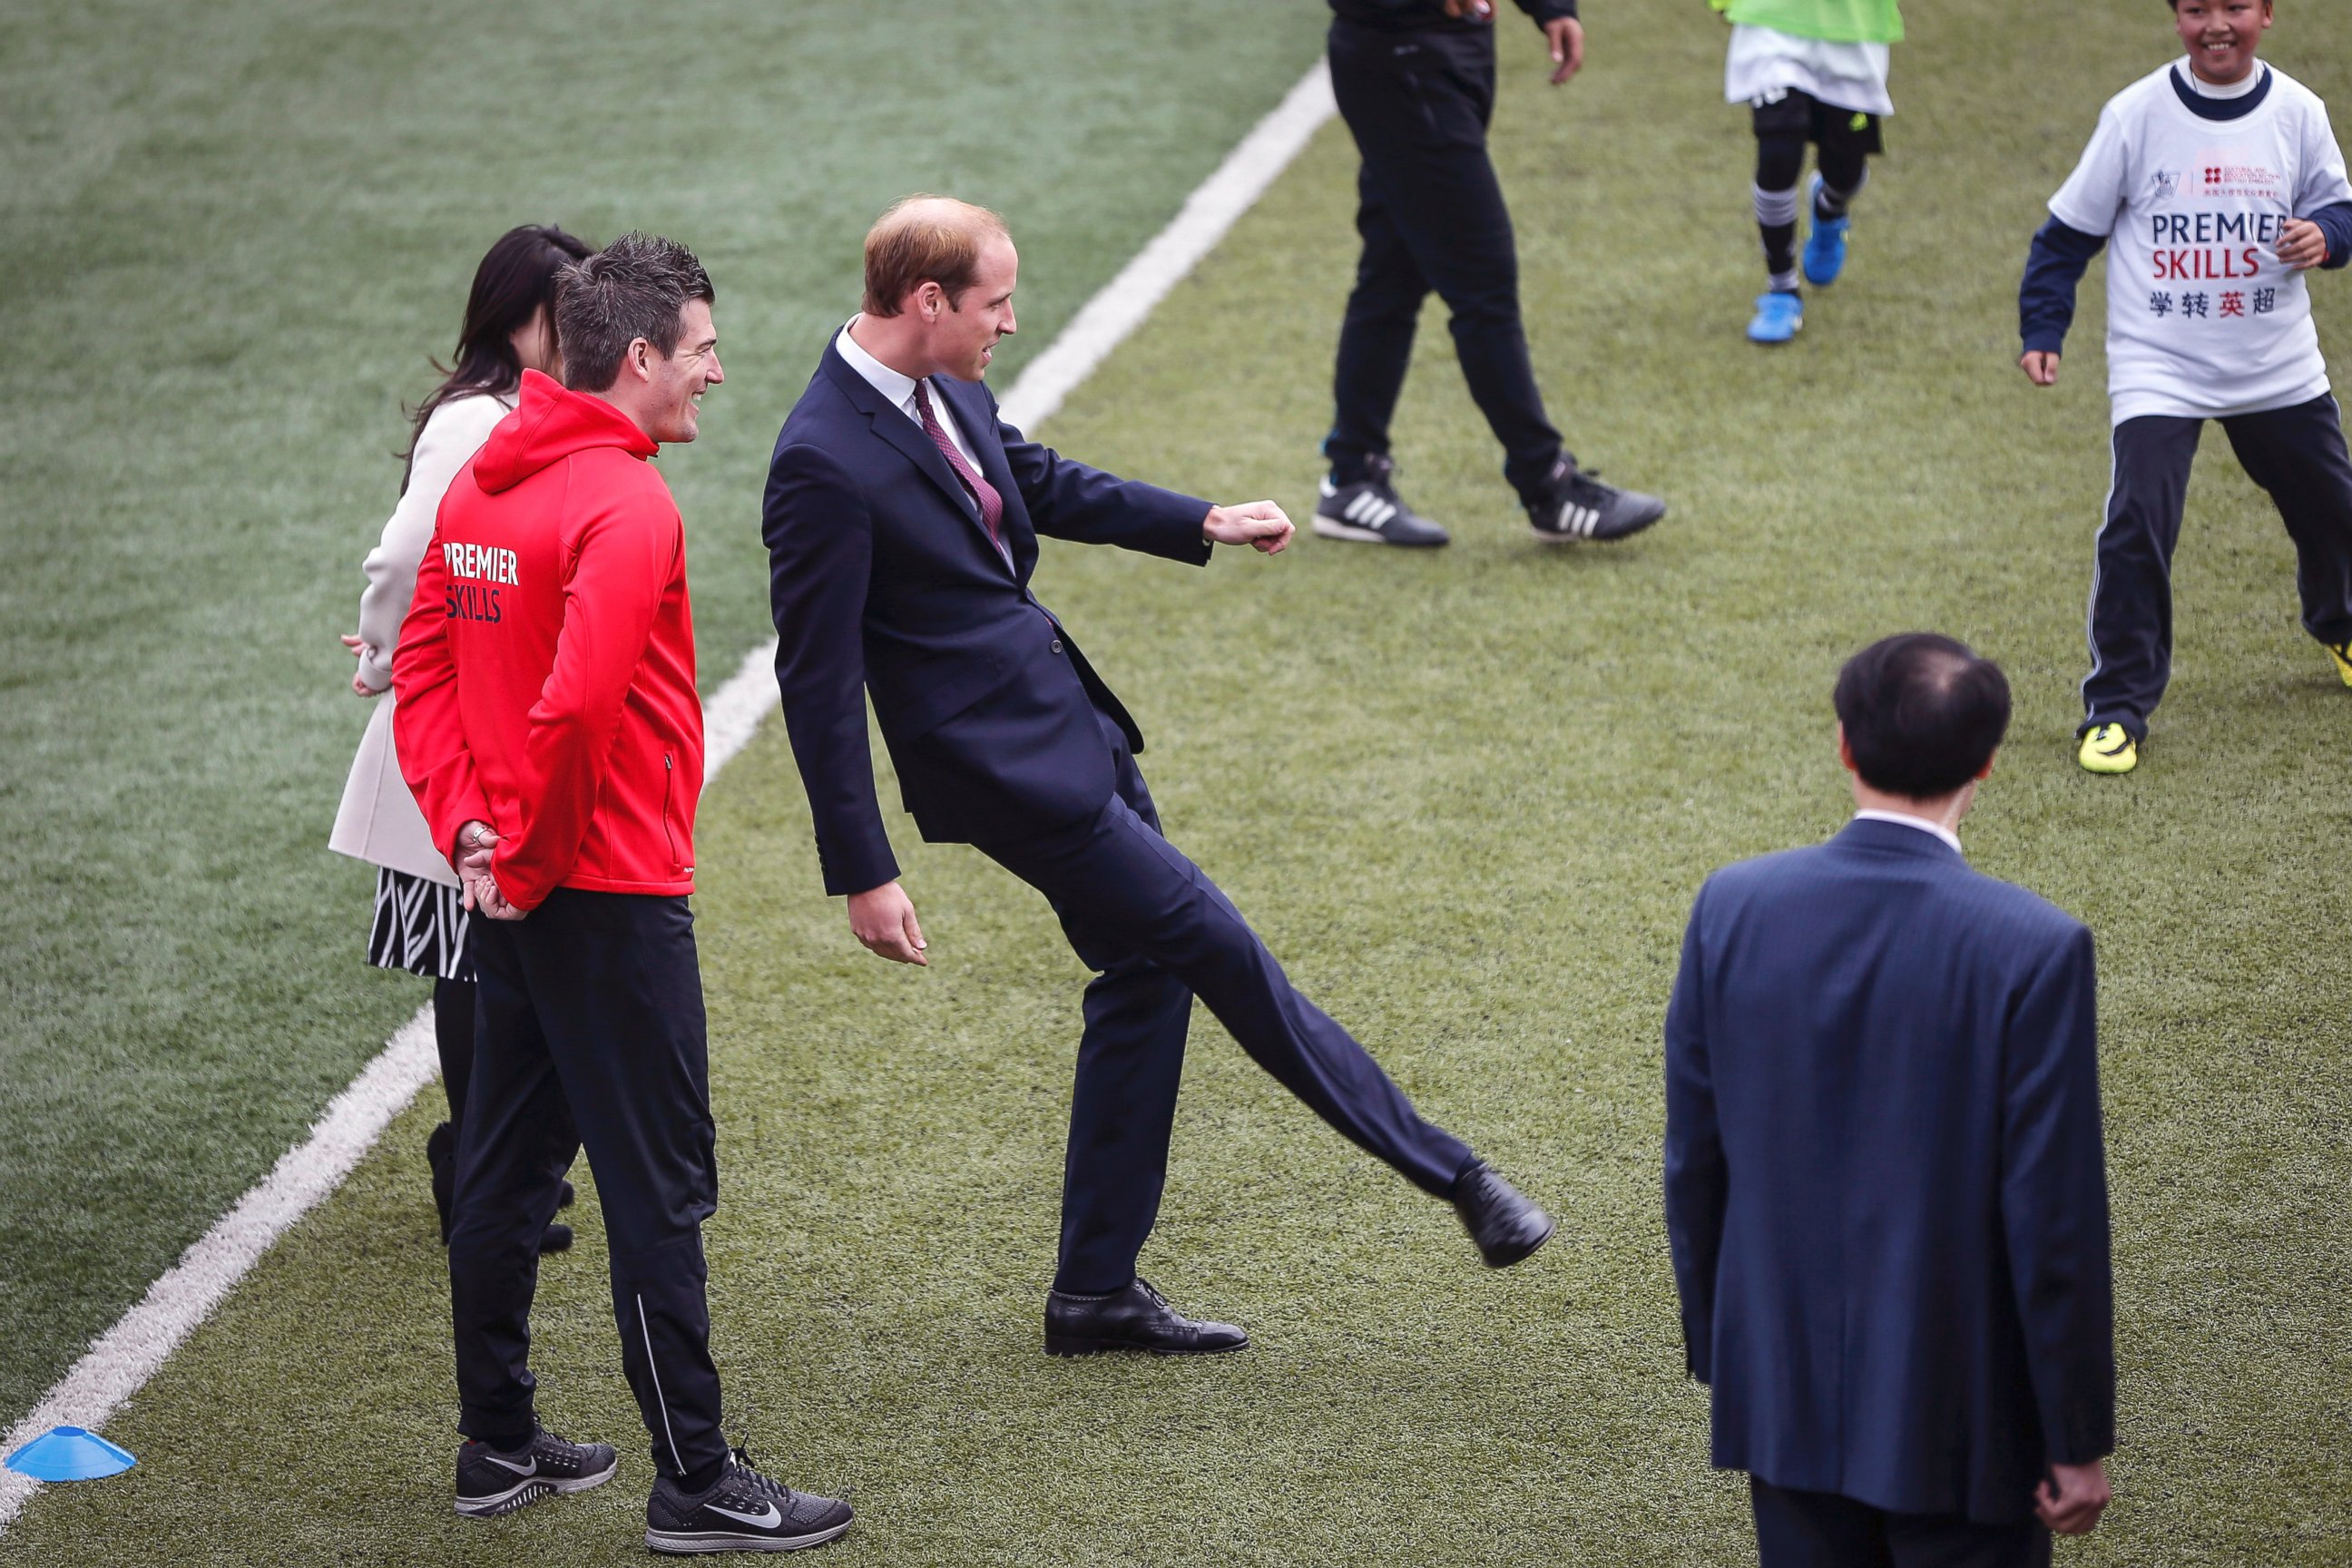 PHOTO: Britain's Prince William, center, kicks a ball as he attends the Premier Skills football coaching event at Nanyang Secondary School in Shanghai, March 3, 2015.